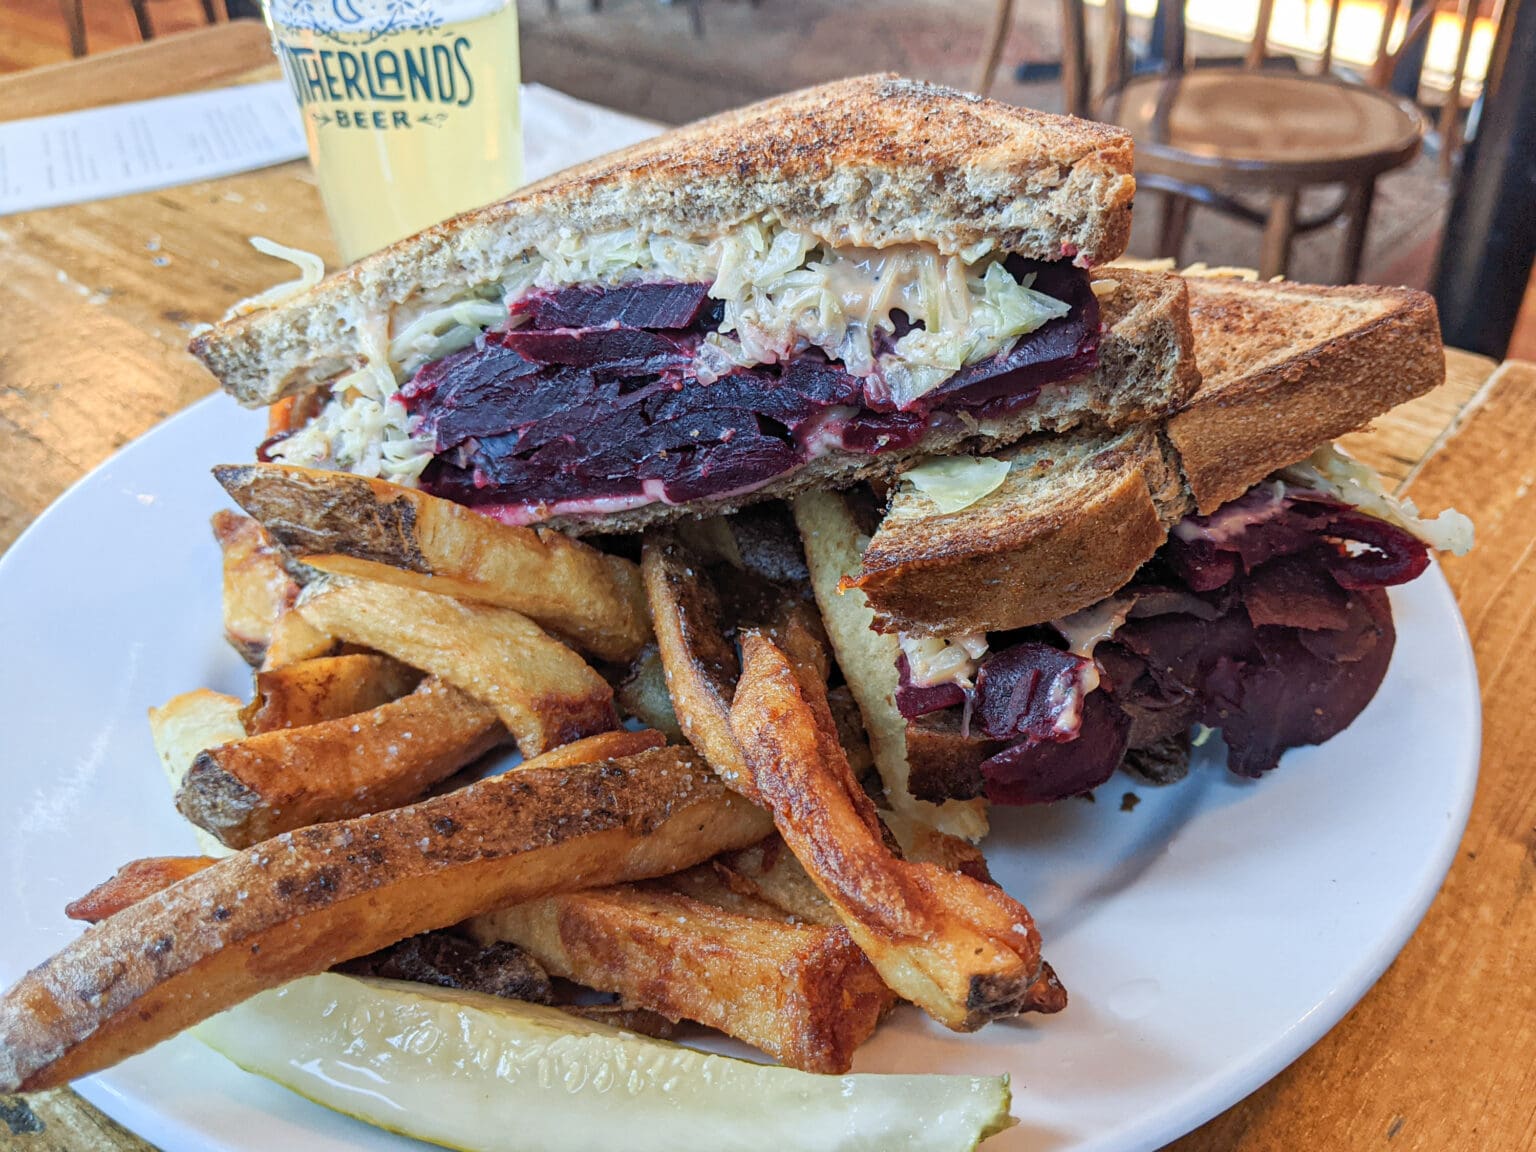 A plate of beet Reuben consists of marbled rye bread, sauerkraut, swiss cheese, and Russian dressing stacked next to fries.